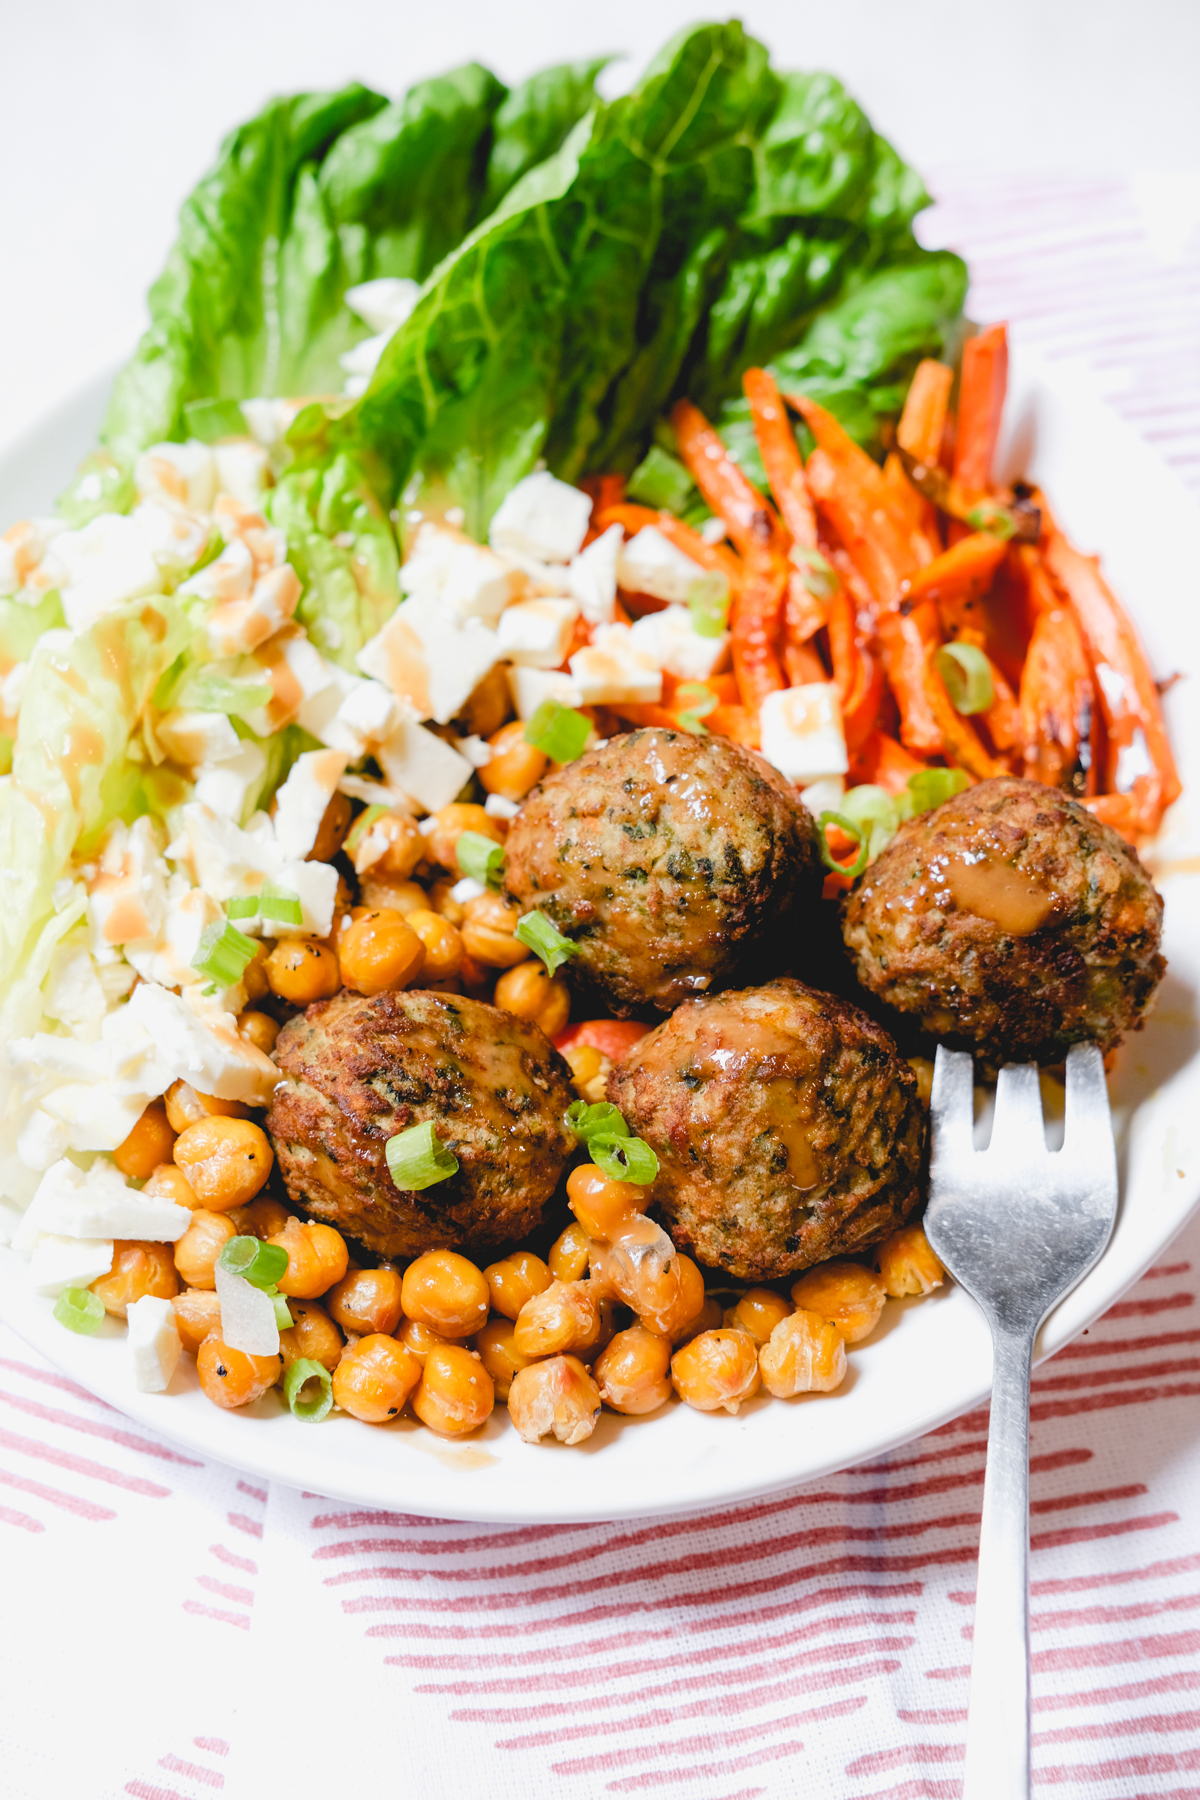 meatball and chickpeas in a salad with carrots, lettuce, and feta cheese